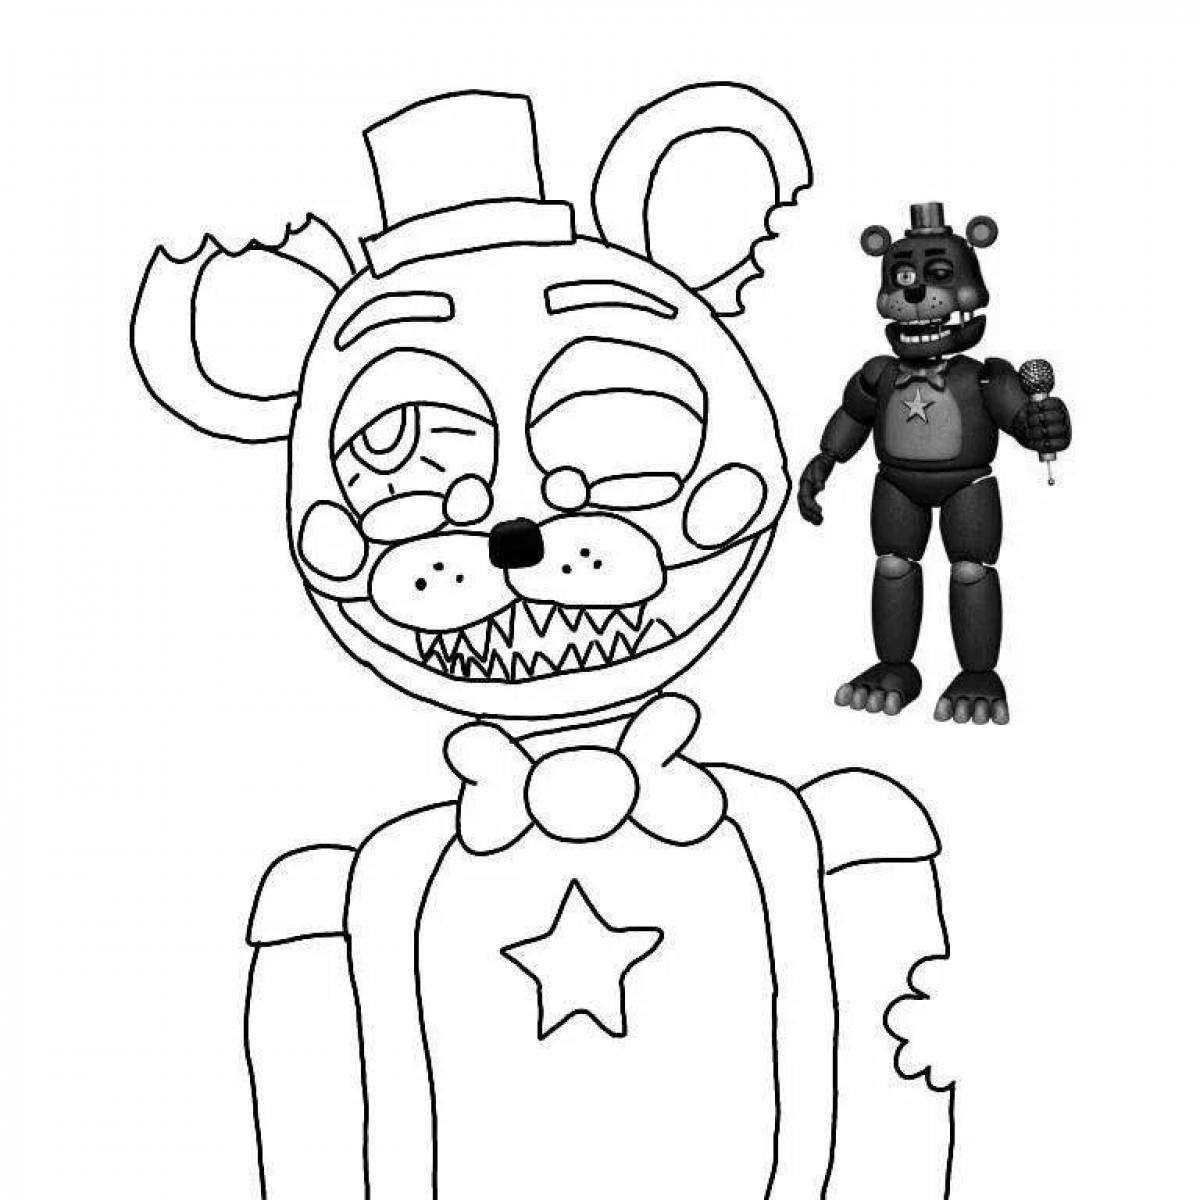 Colorful fnaf 6 coloring page